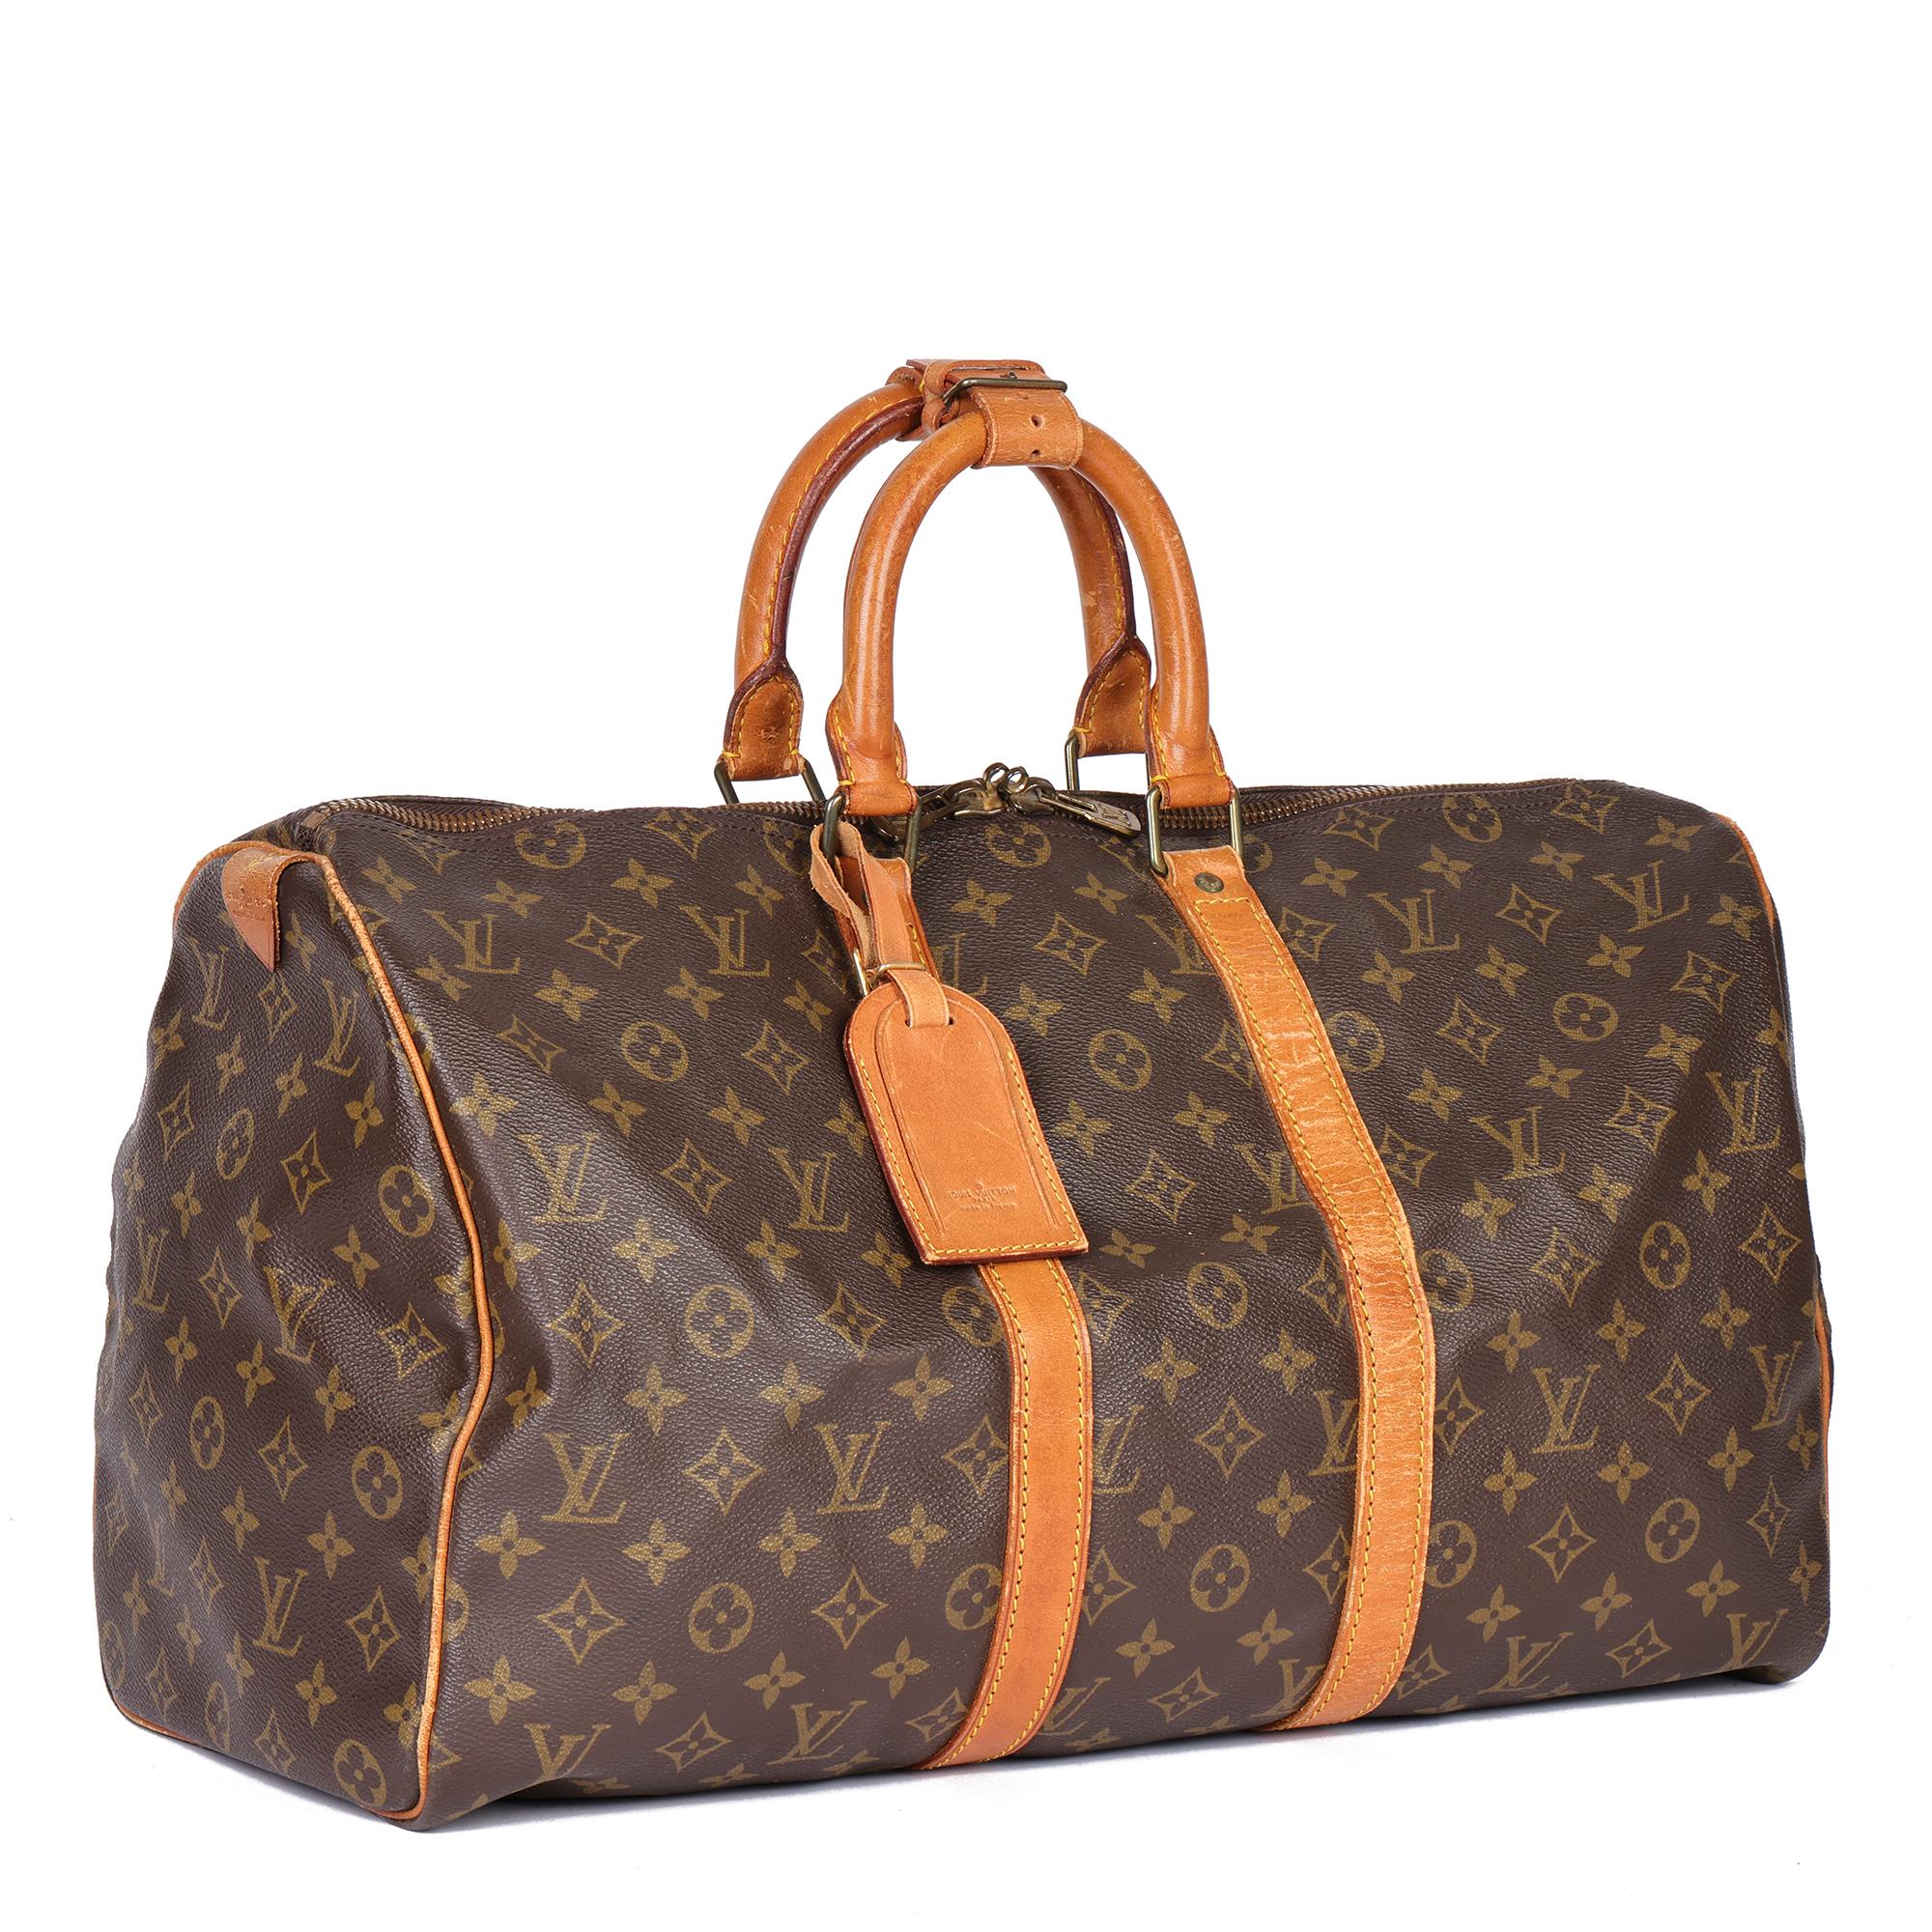 LOUIS VUITTON
Brown Monogram Coated Canvas & Vachetta Leather Vintage Keepall 45

Serial Number: V.I.862
Age (Circa): 1982
Accompanied By: Luggage Tag, Handle Keeper
Authenticity Details: Date Stamp (Made in France)
Gender: Ladies
Type: